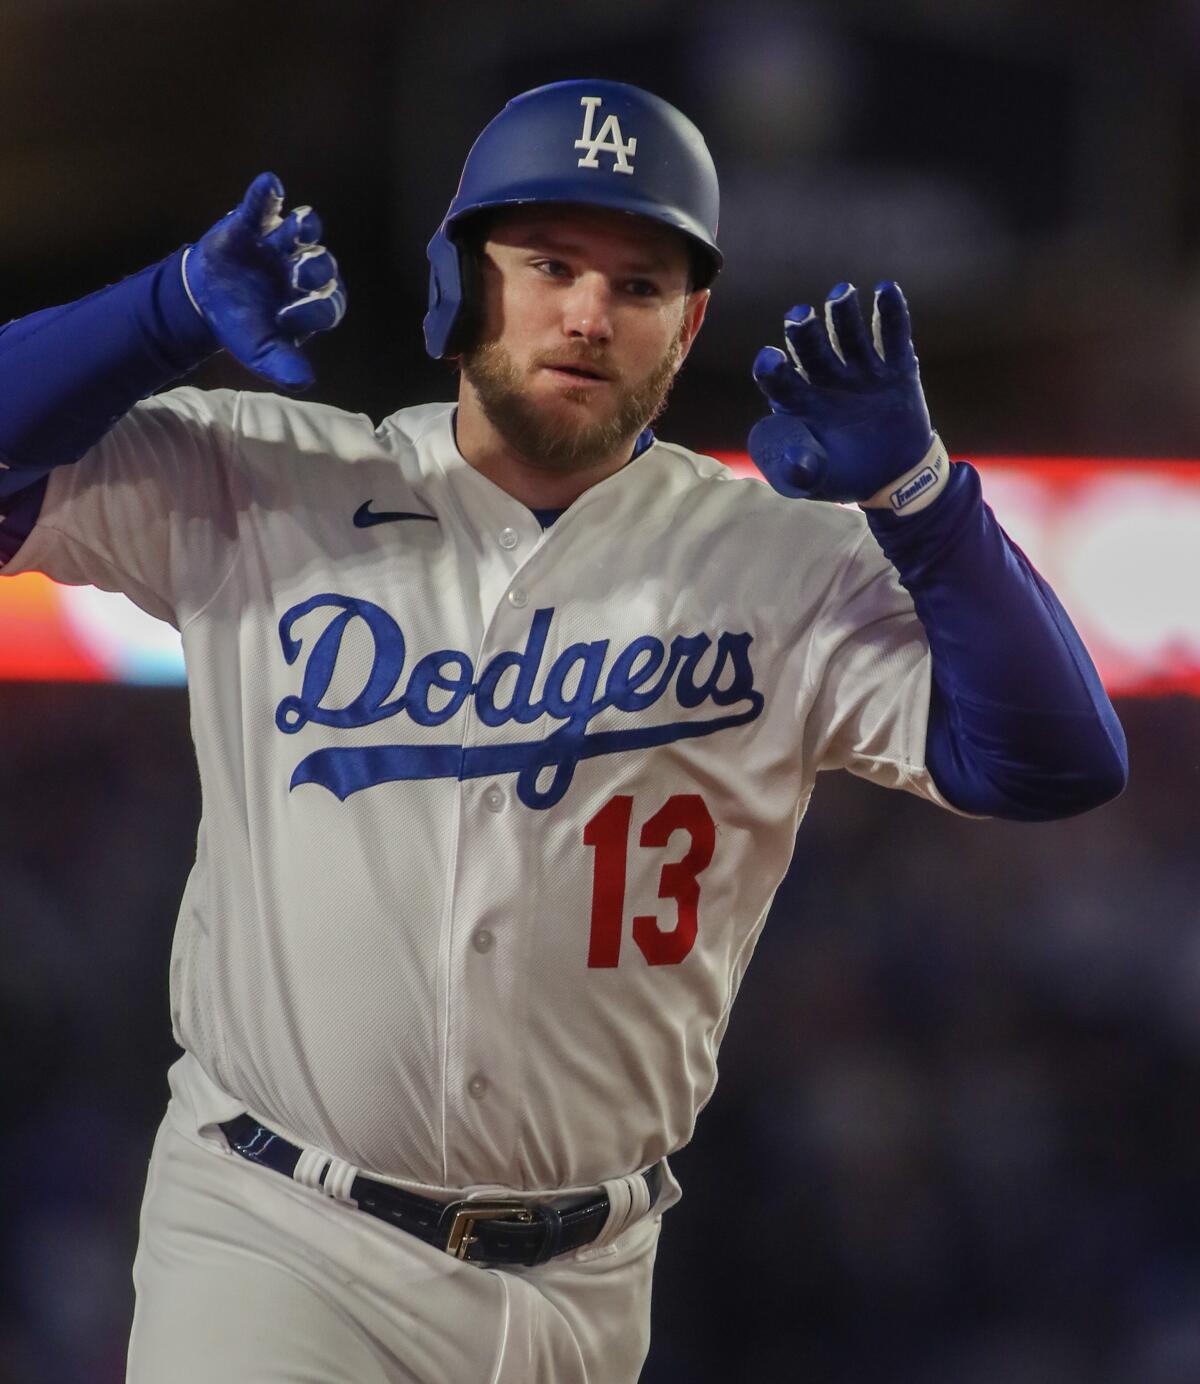 Max Muncy celebrates after hitting a solo home run in the seventh inning.